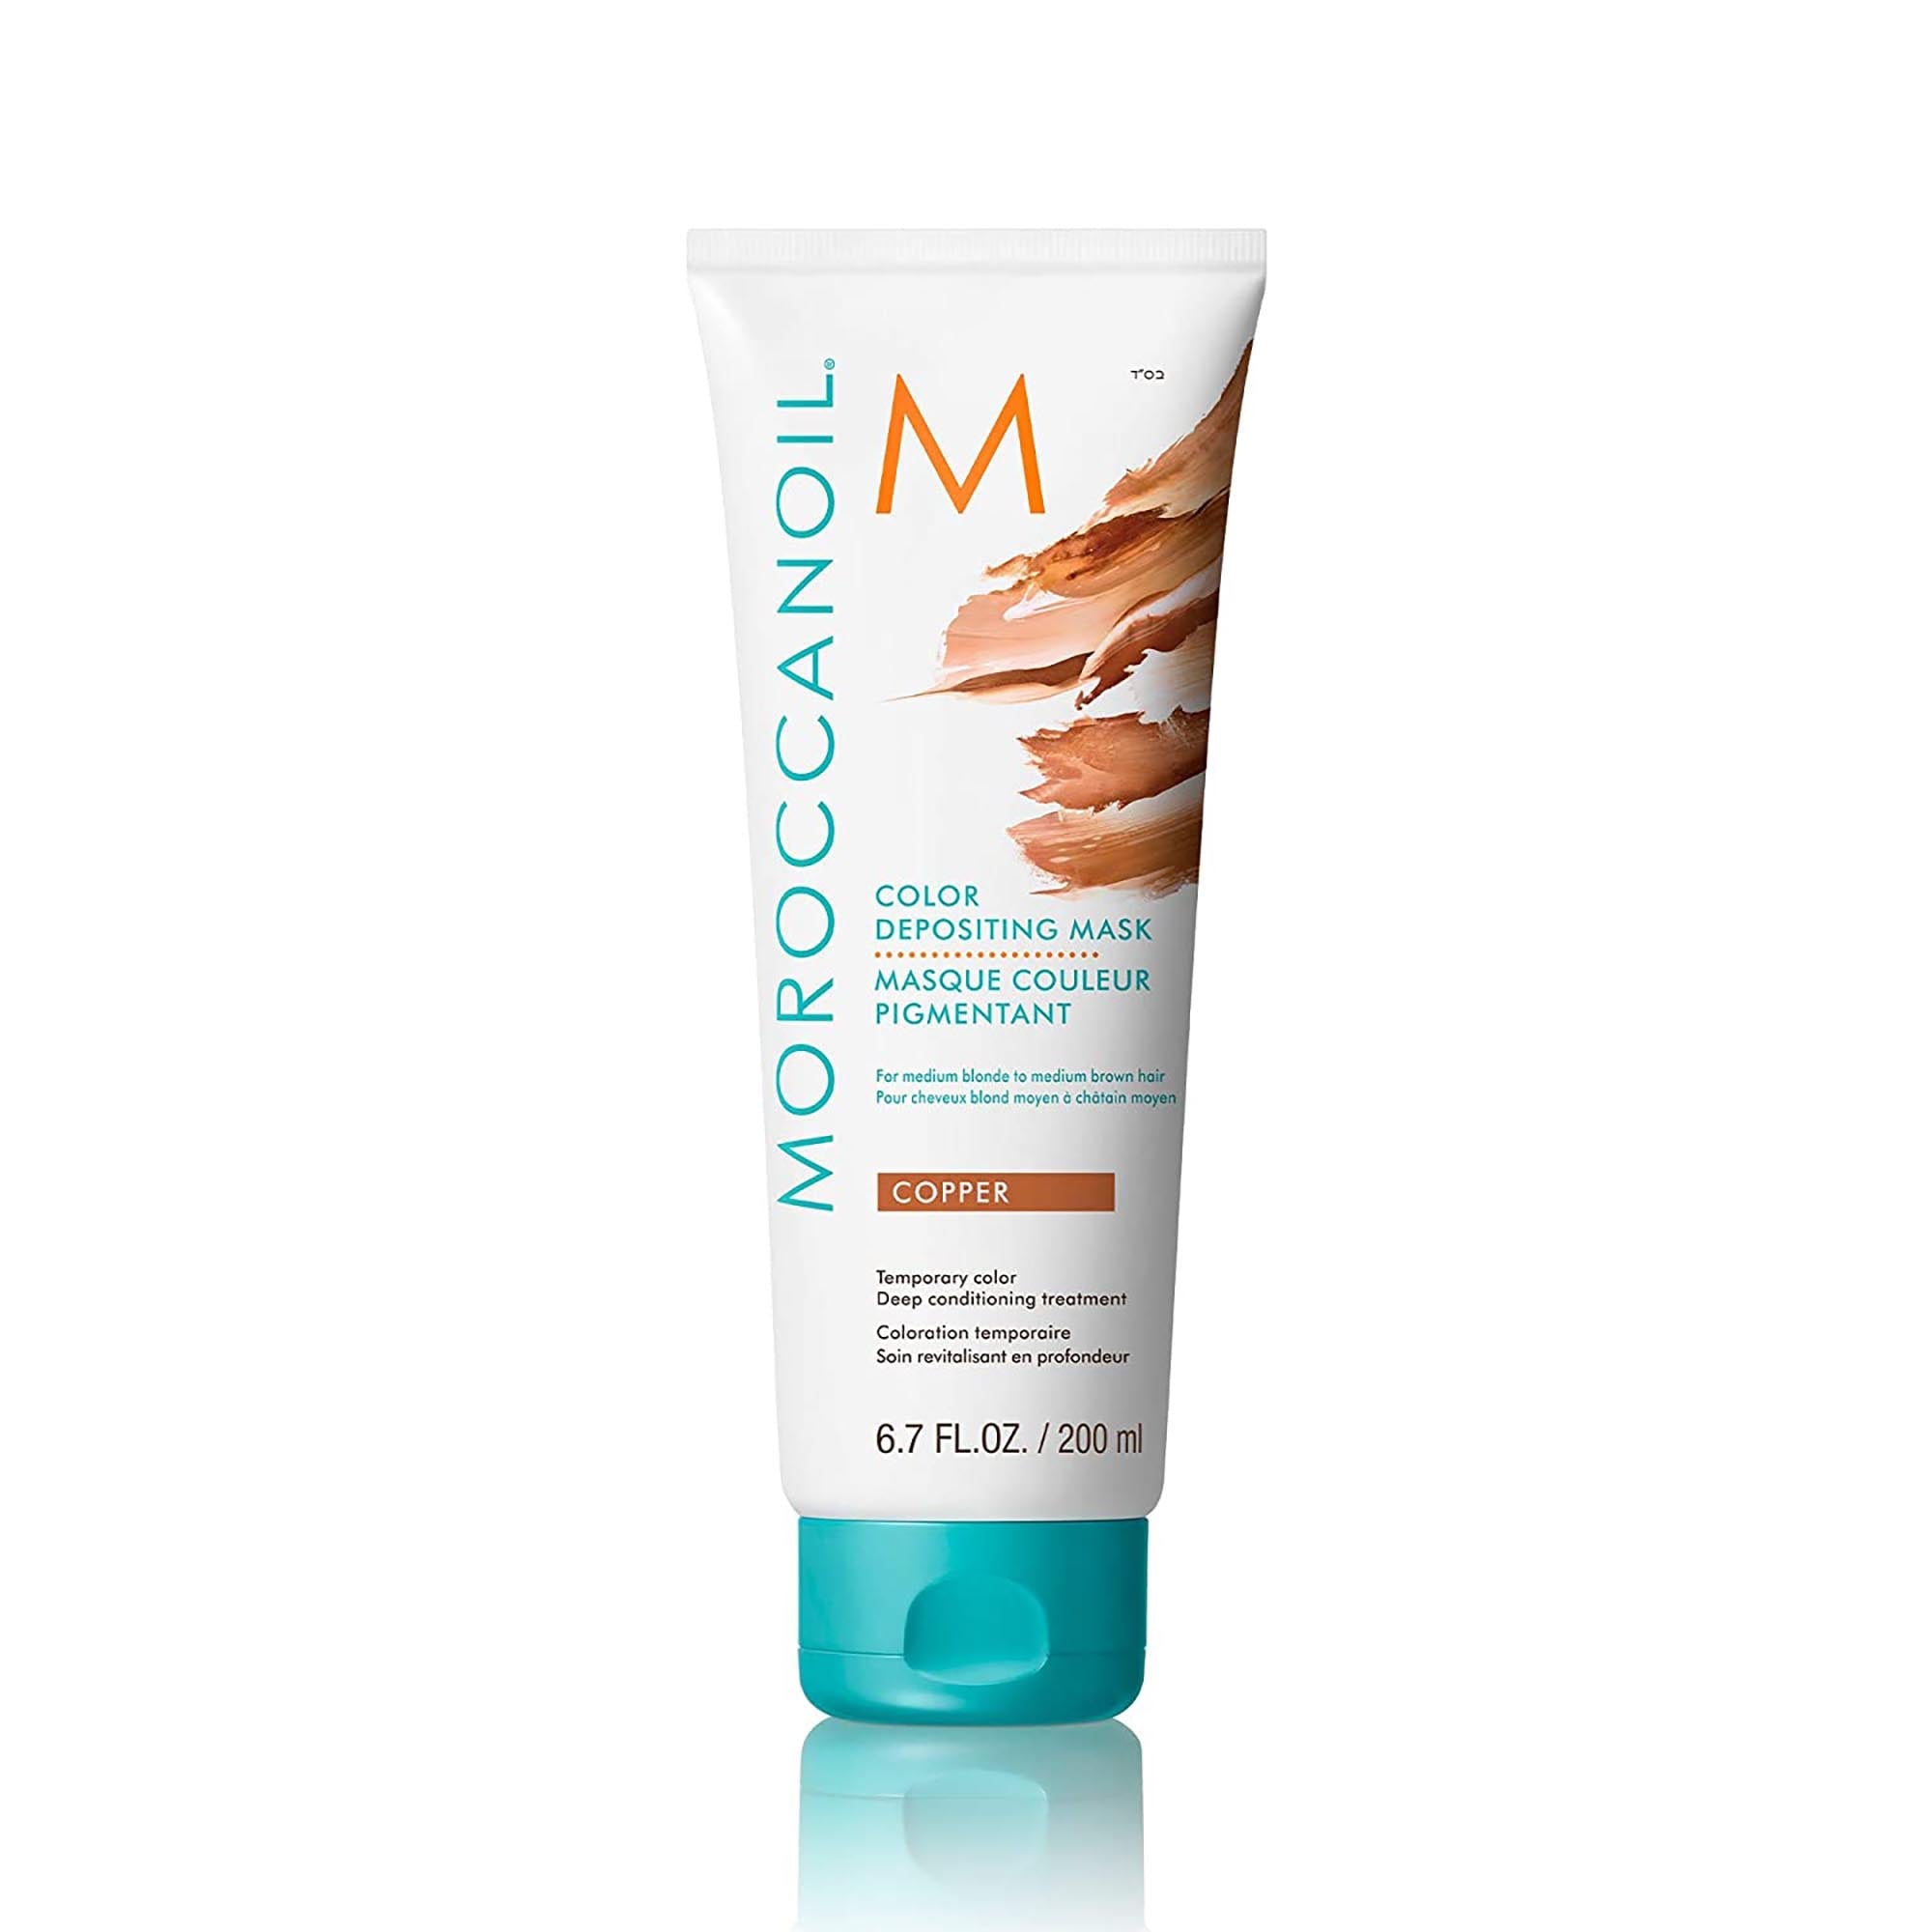 Moroccanoil Copper Color Depositing Mask 6.7 oz (Buy 3 Get 1 Free Mix & Match)